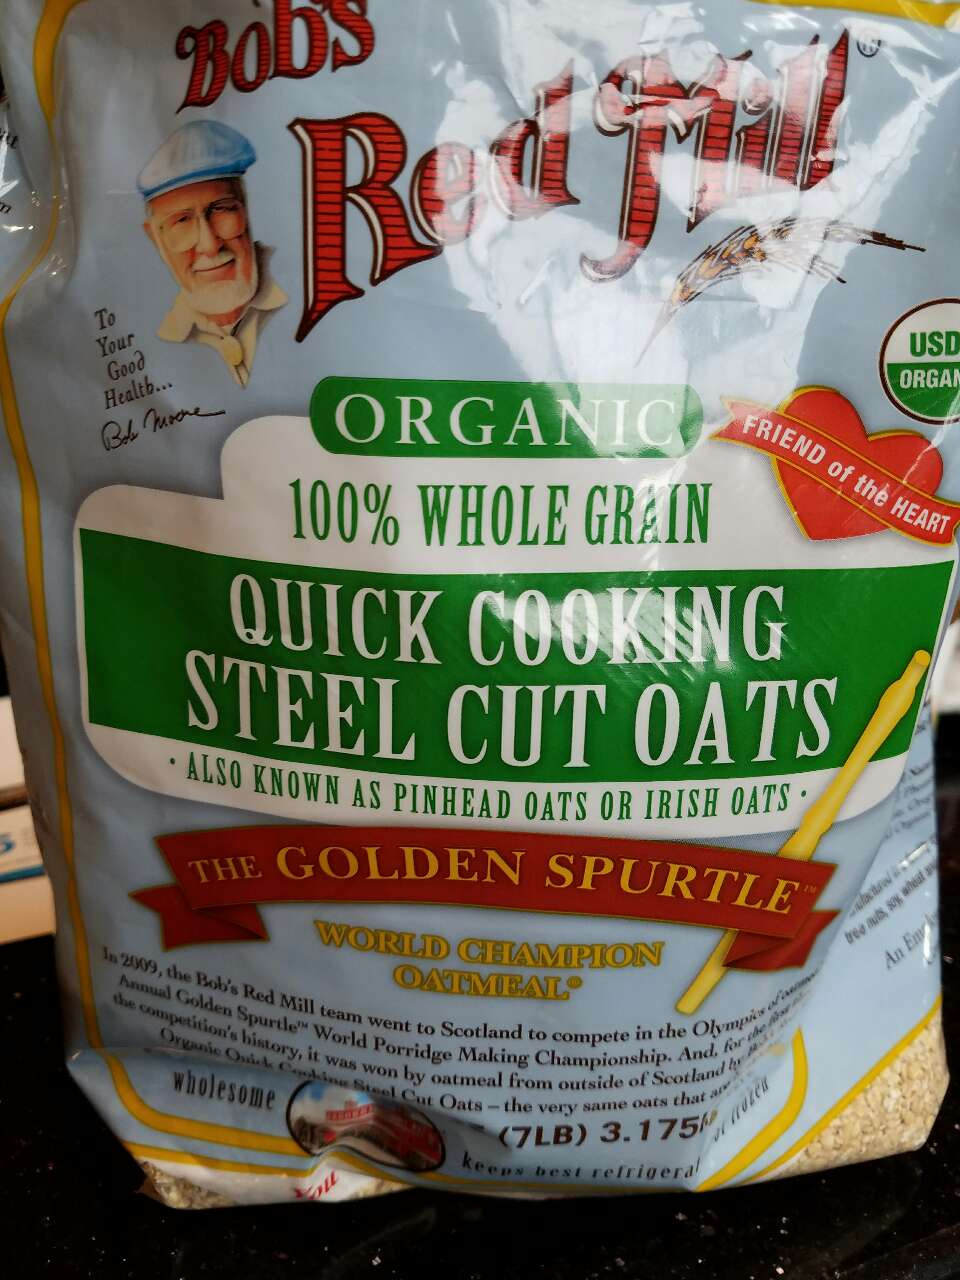 Quick Cooking Steel Cut Oats
 Bob s Red Mill Organic Whole Grain Quick Cooking